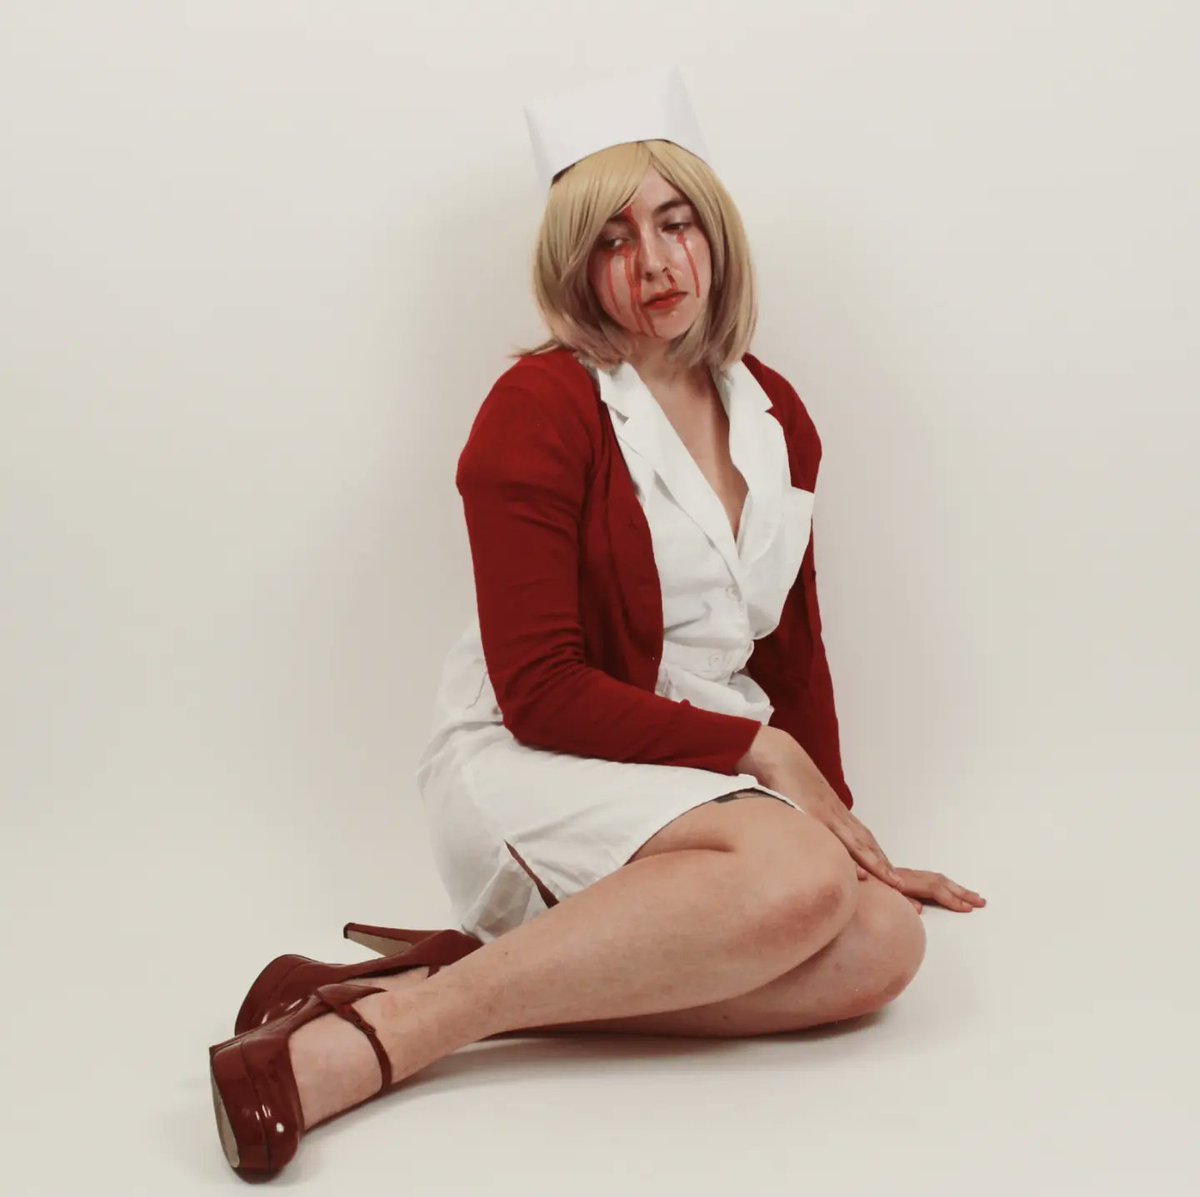 More Lisa Garland and more Silent hill tonight at 8pm! #cosplaystreamer